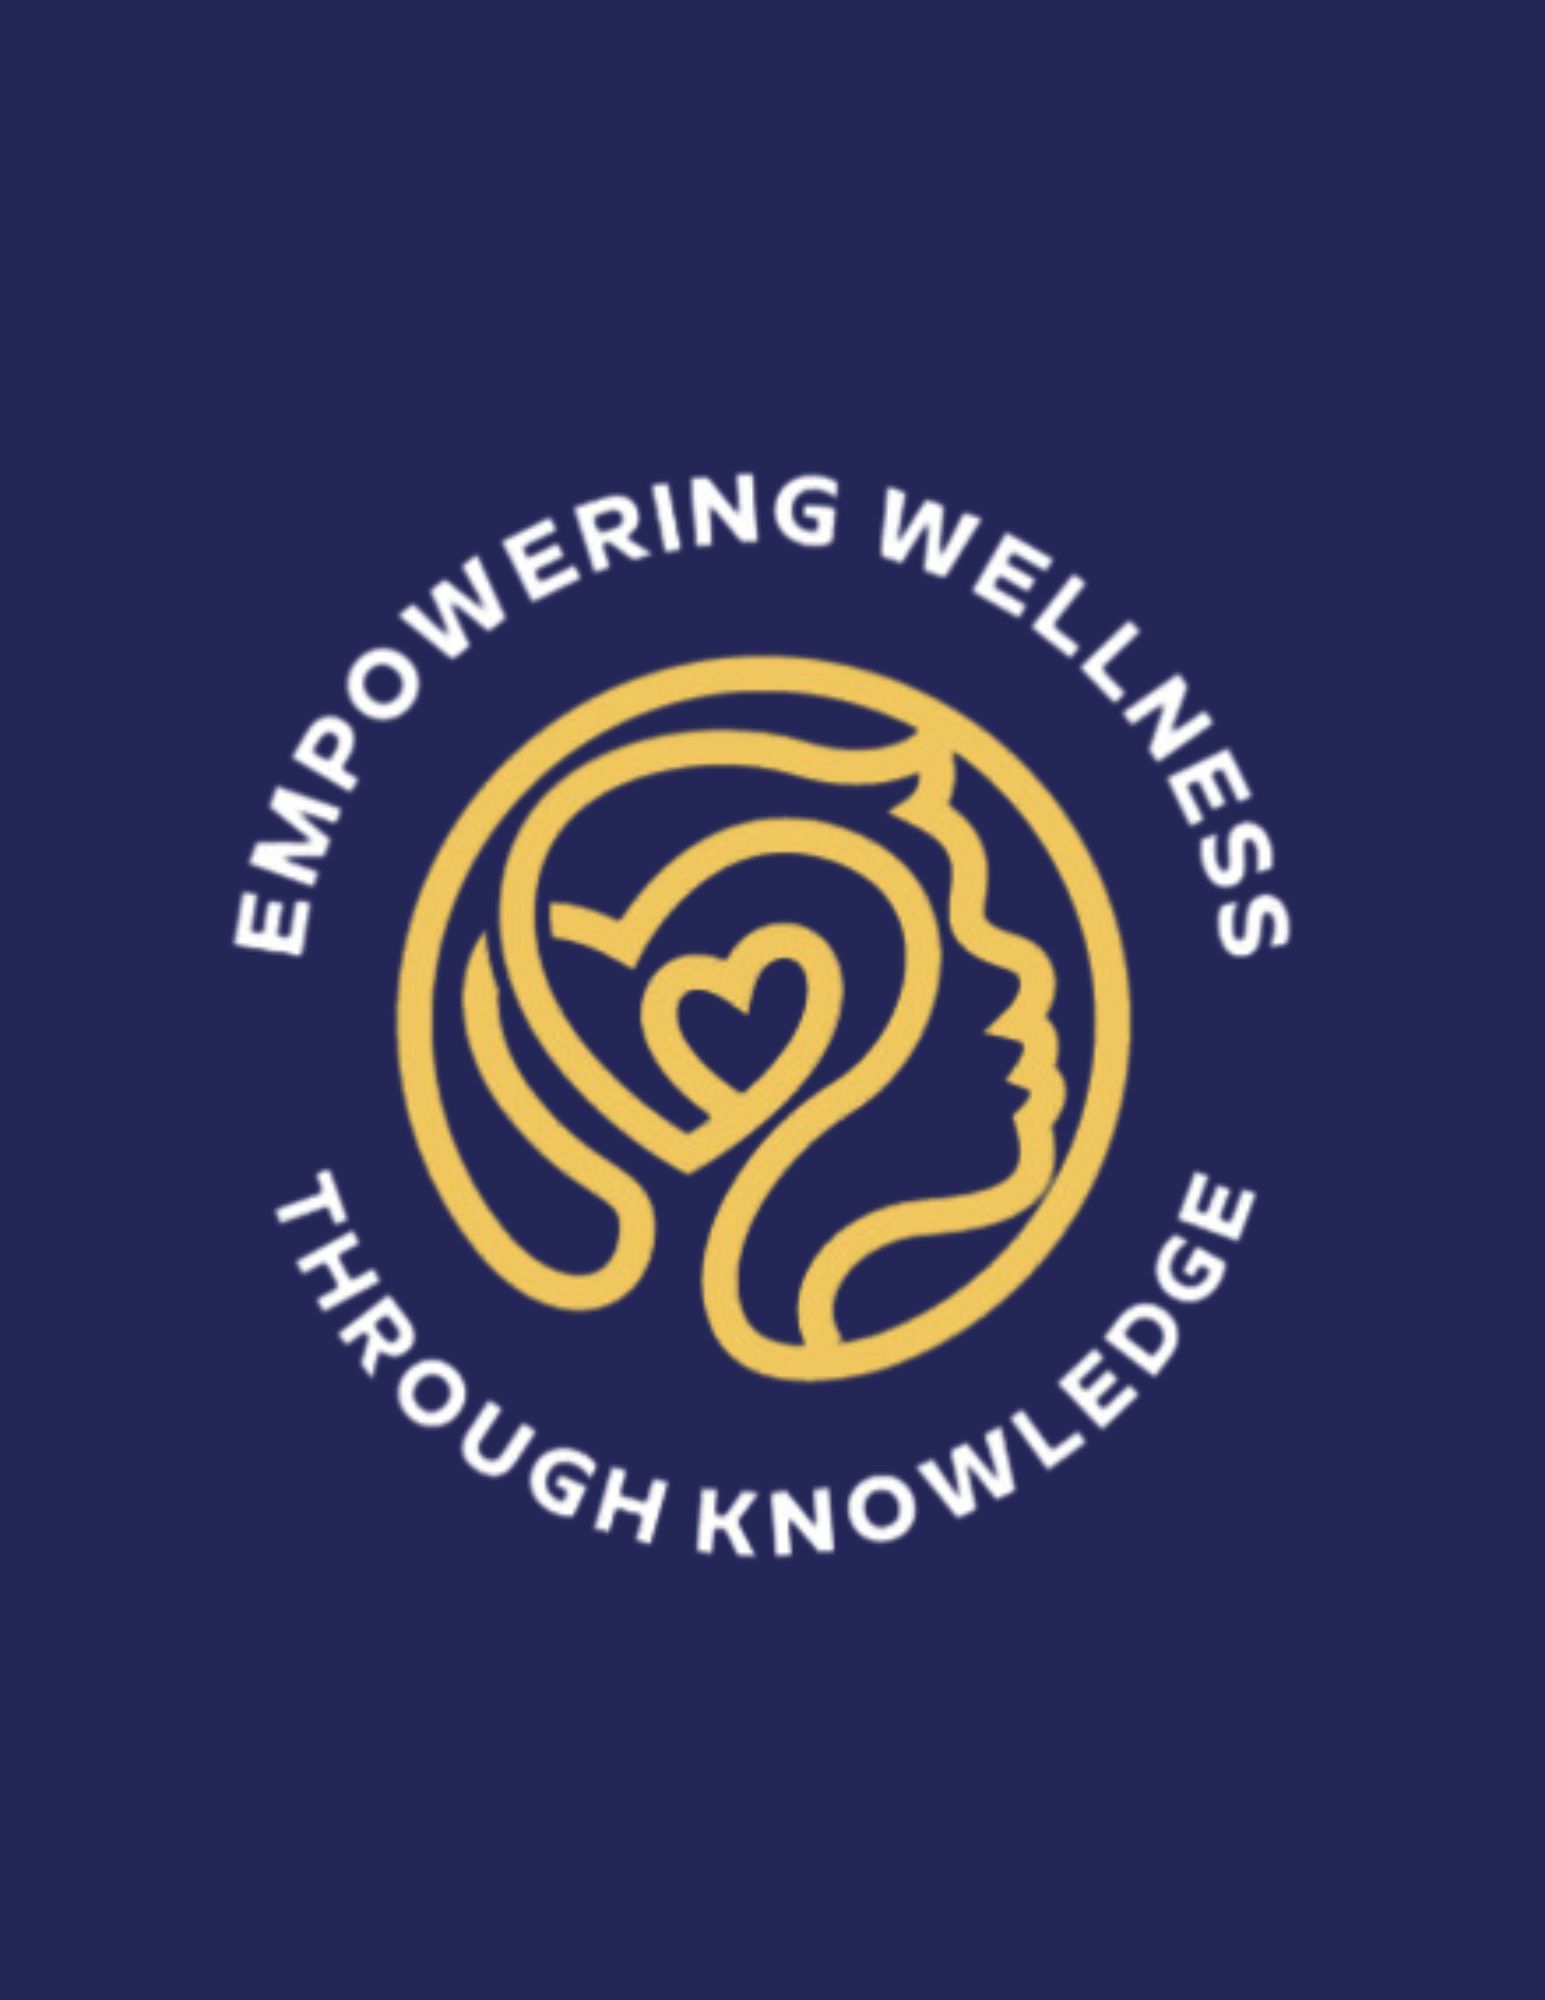 Logo symbolizing knowledge and enlightenment, representing empowerment through education in seminars